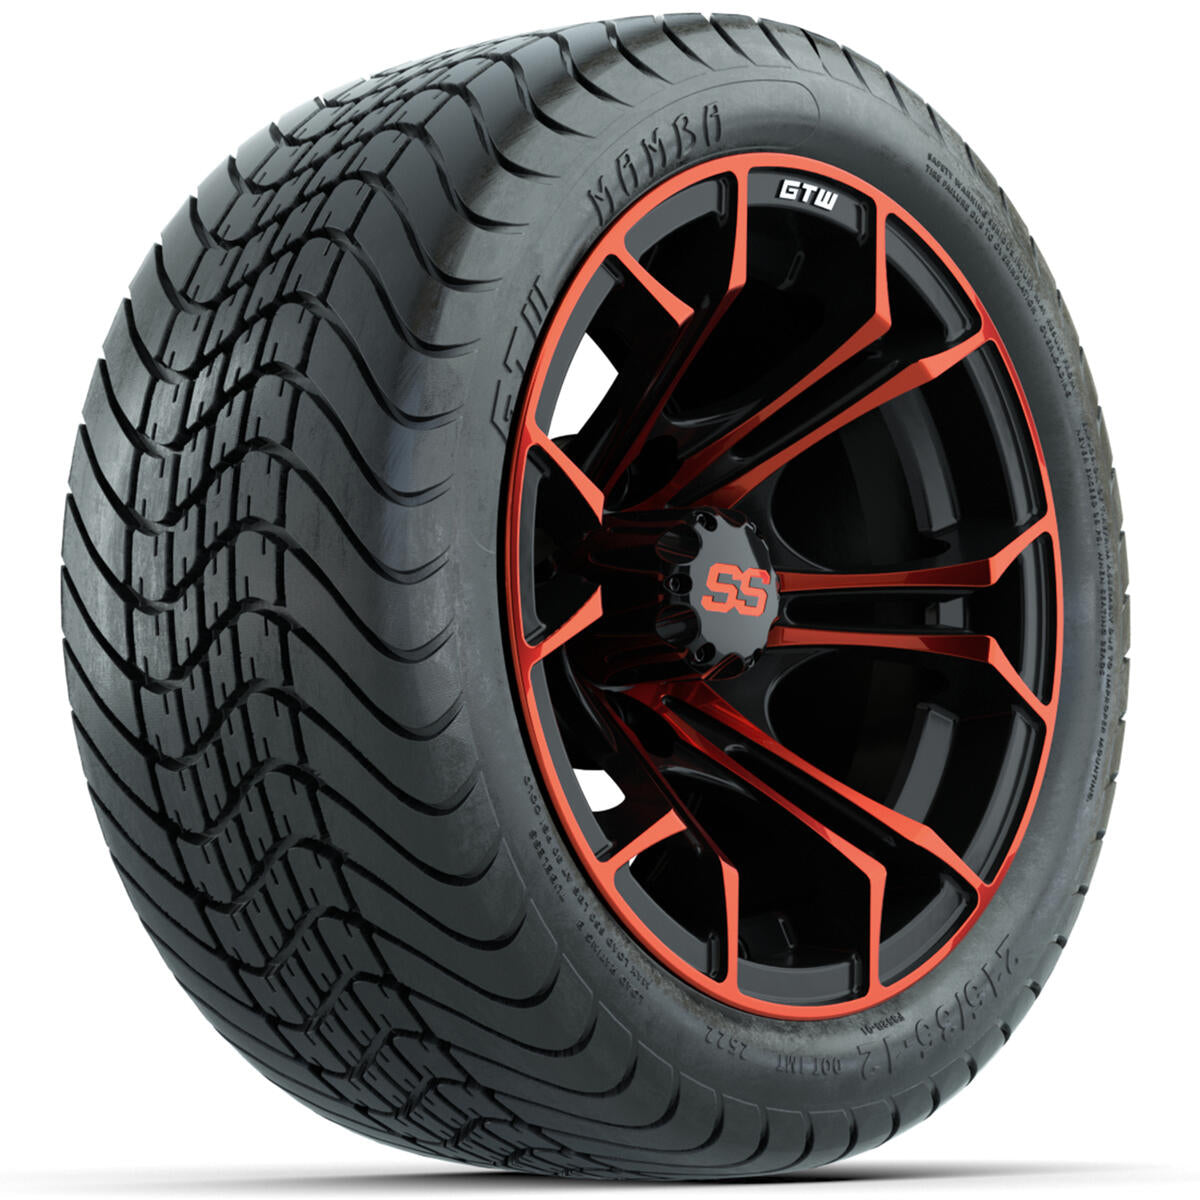 Set of 4 12"in GTW Spyder Wheels with 215/35-12"GTW Mamba Street Tires A19-655